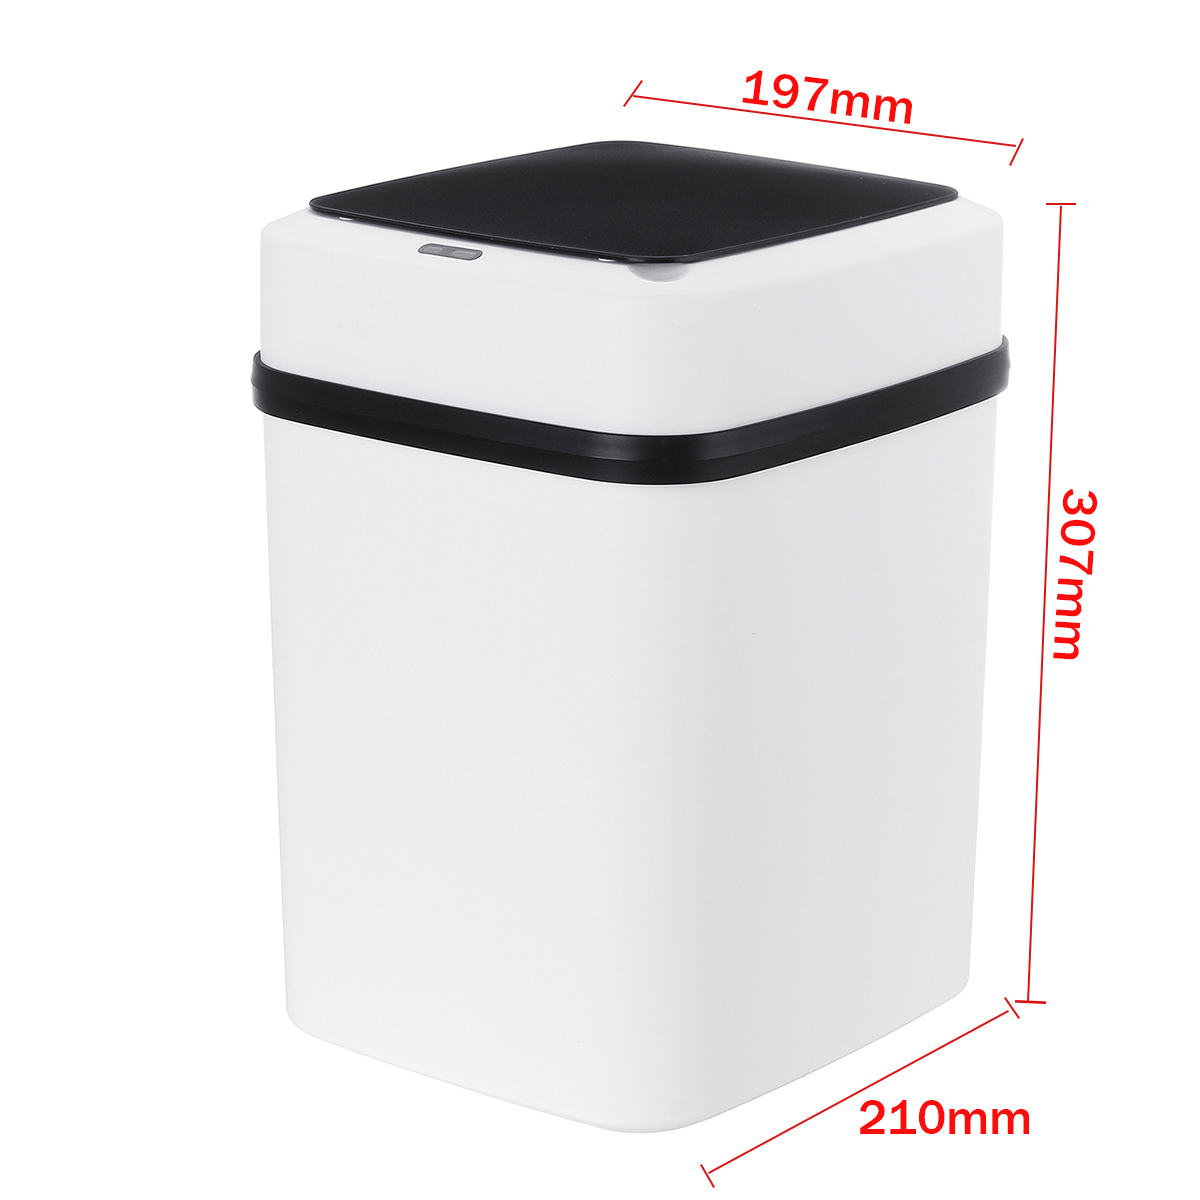 Full-Automatic-Sensor-Rechargeable-Waste-Bins-Household-Smart-Trash-Can-1613282-6